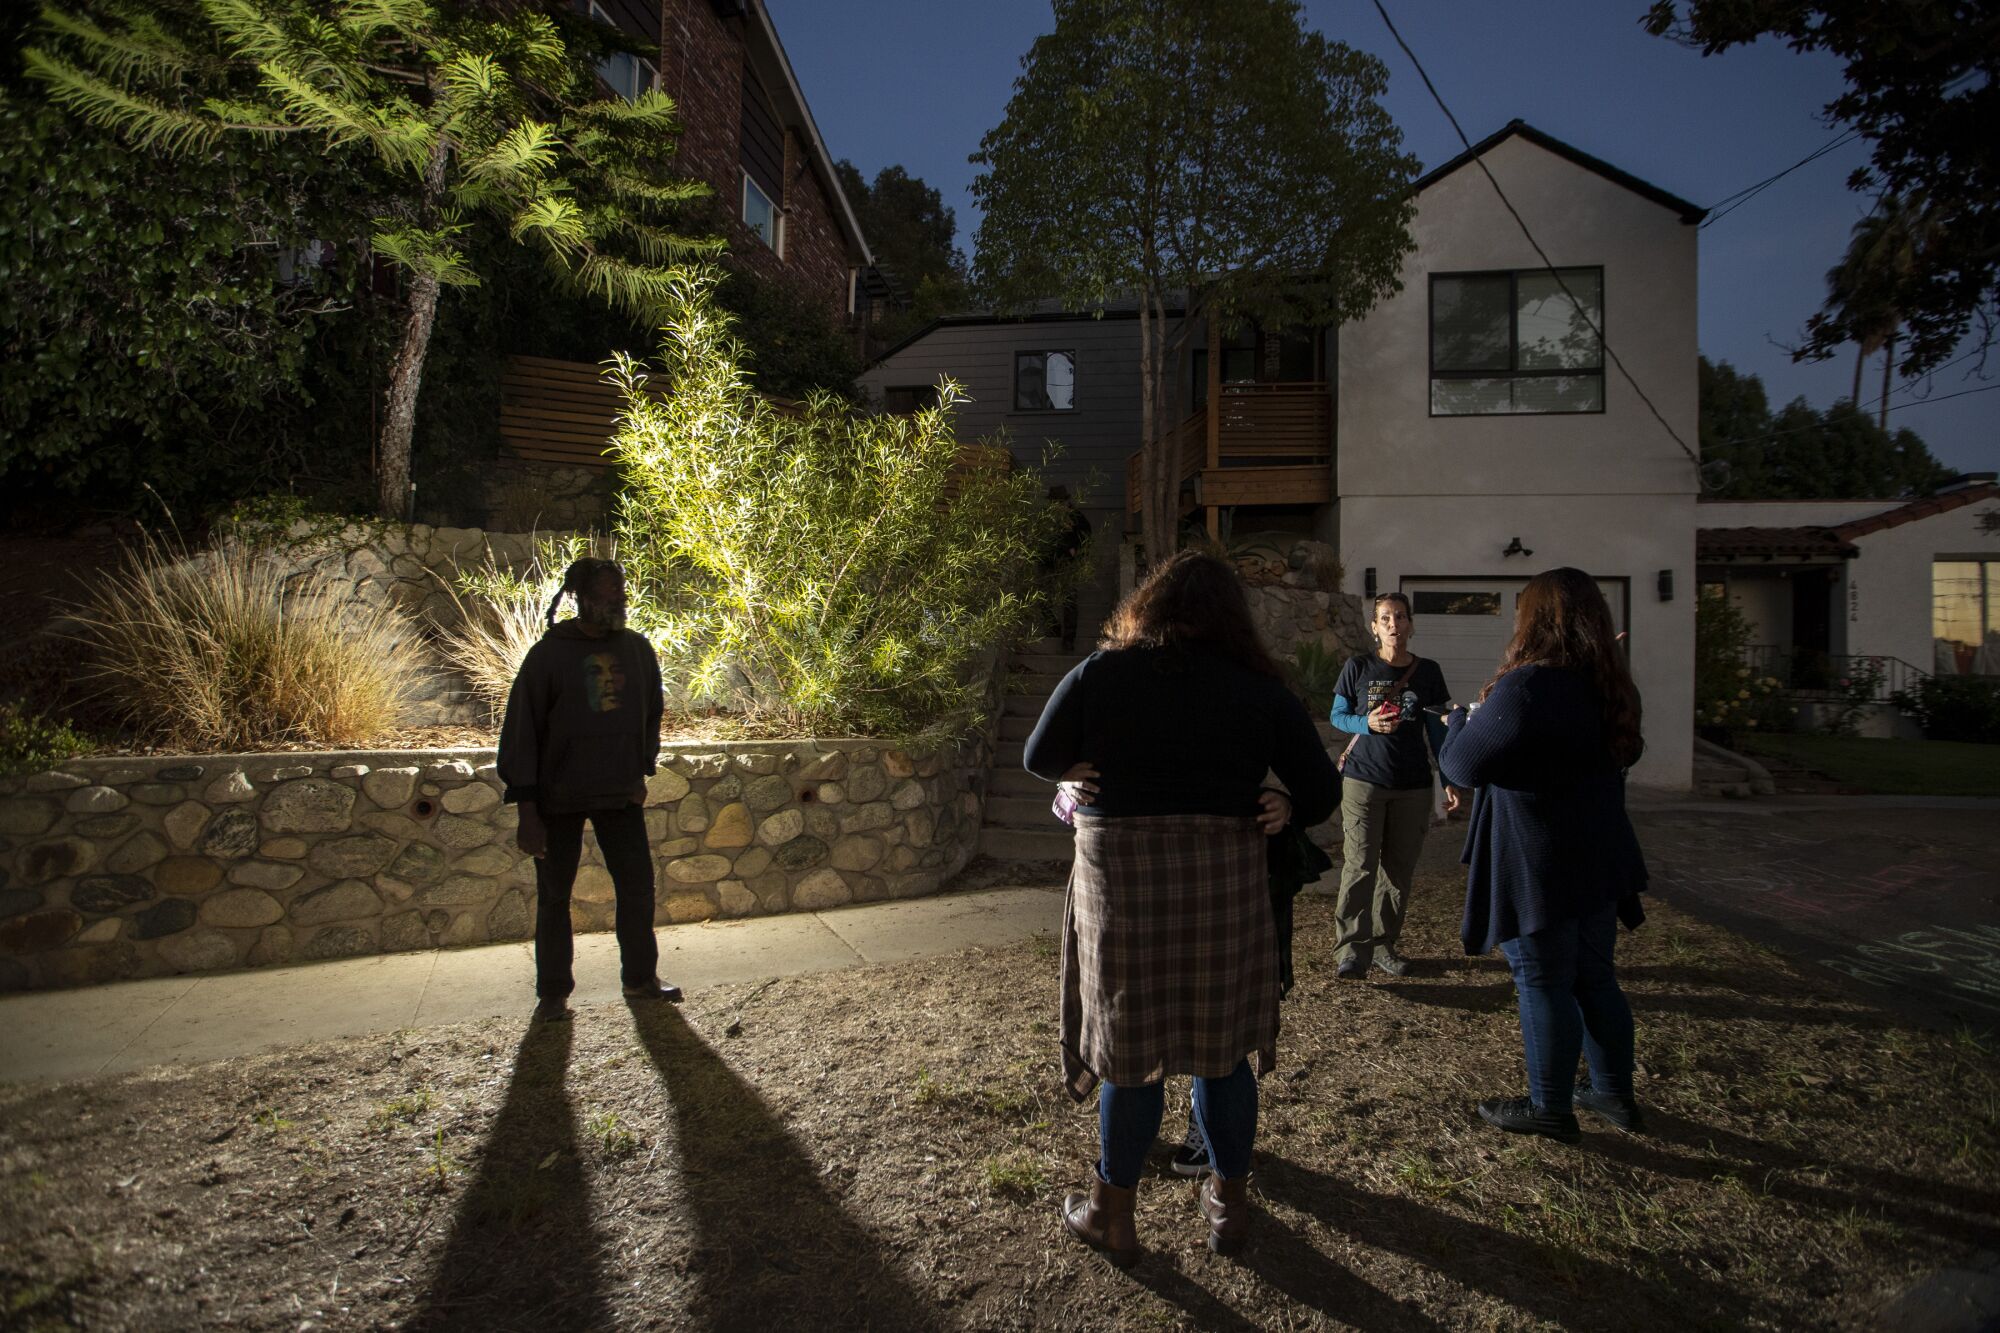 Protesters stand in an Eagle Rock neighborhood after dark.